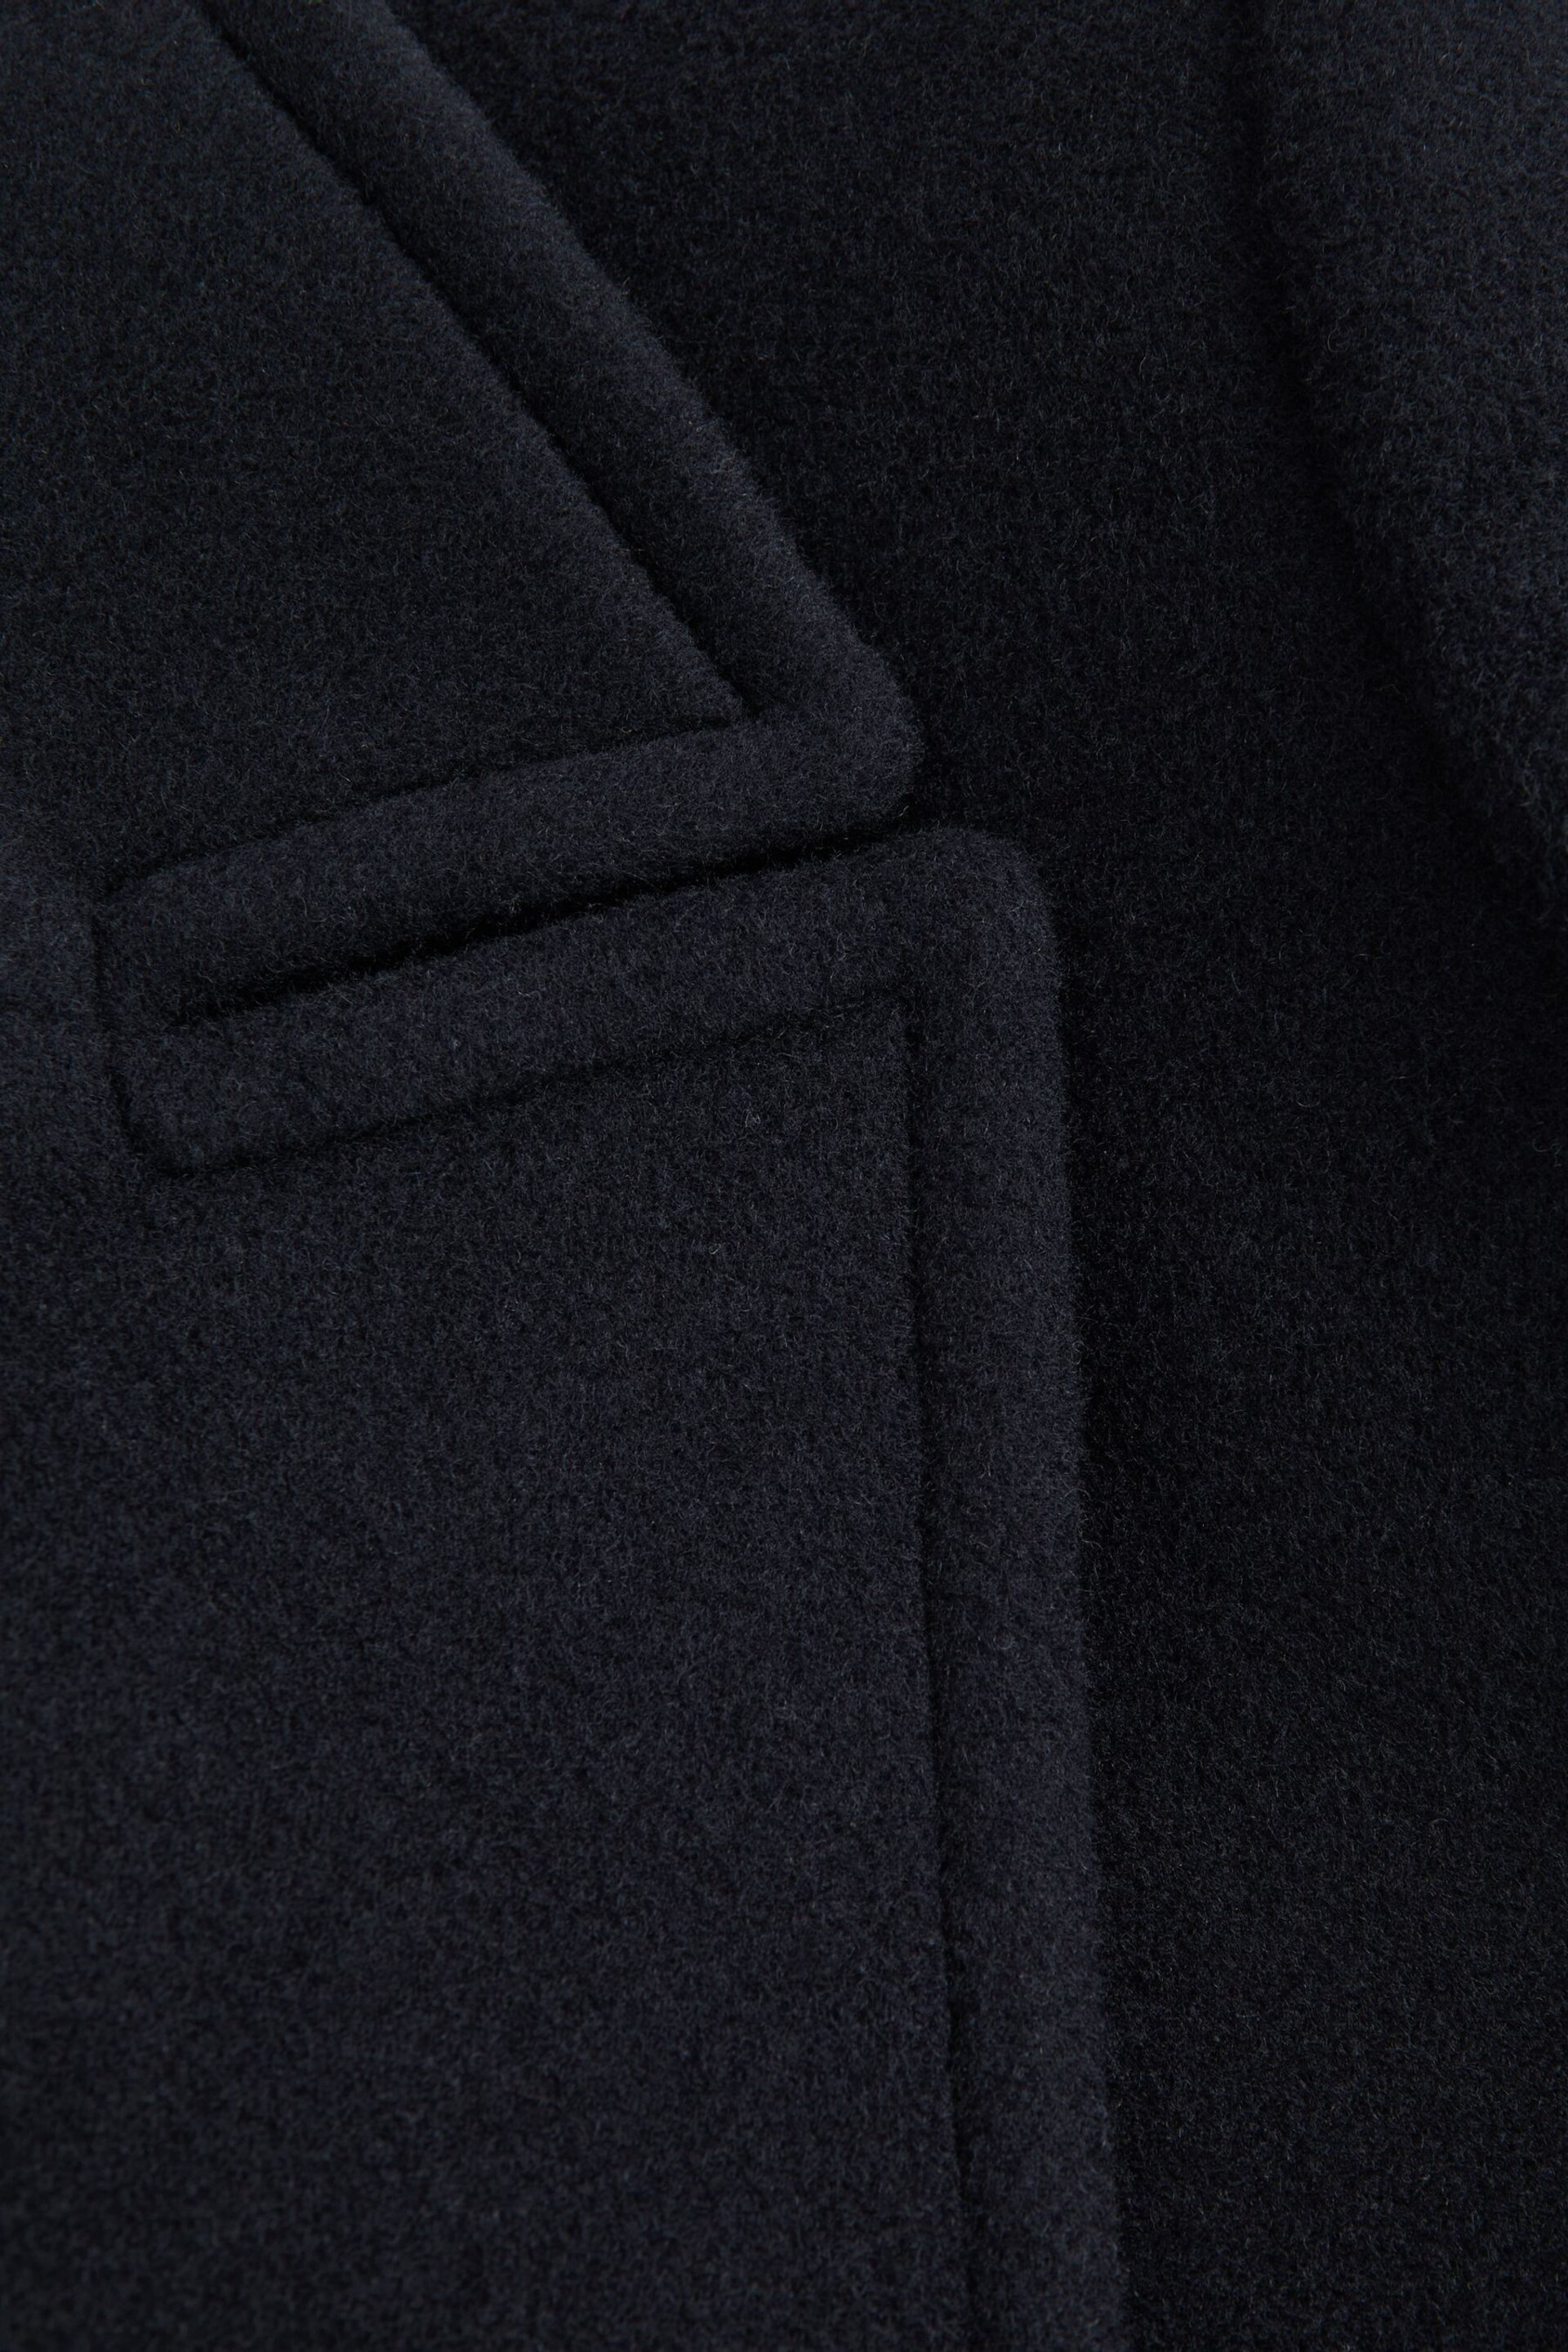 Reiss Light Navy Bergamo Wool Blend Double Breasted Peacoat - Image 6 of 6